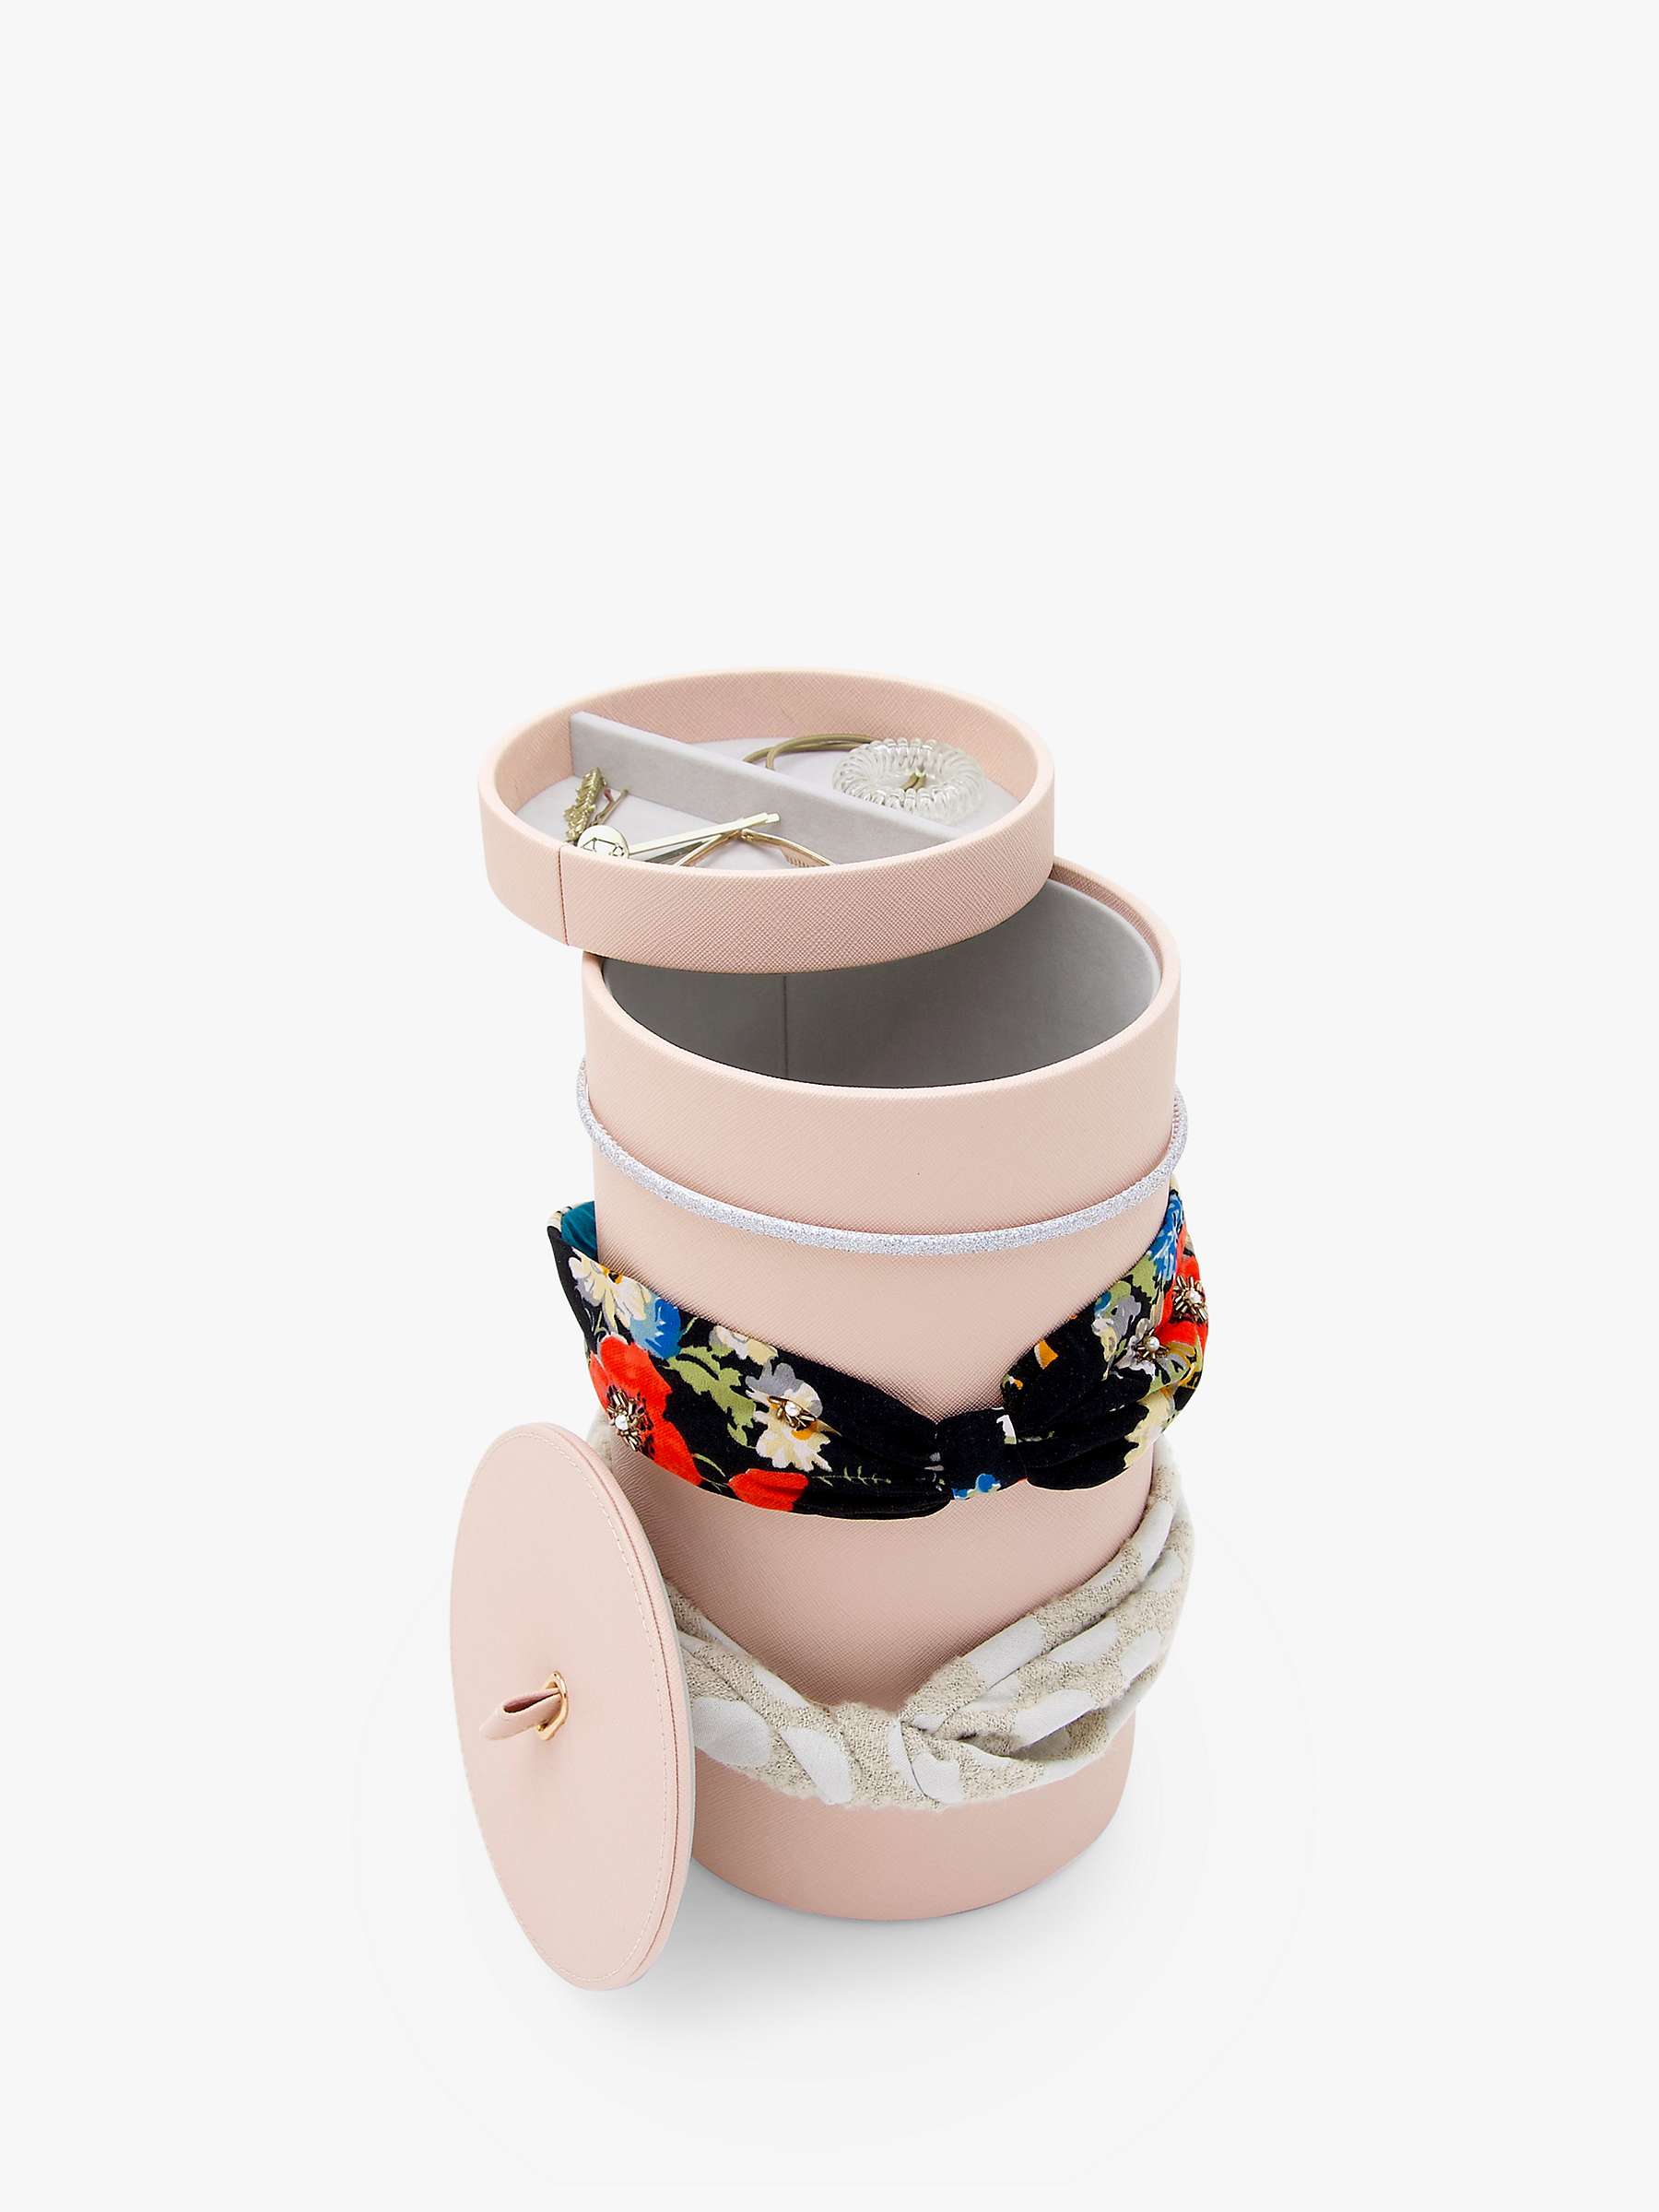 Buy Stackers Hair Accessories Storage Station Online at johnlewis.com